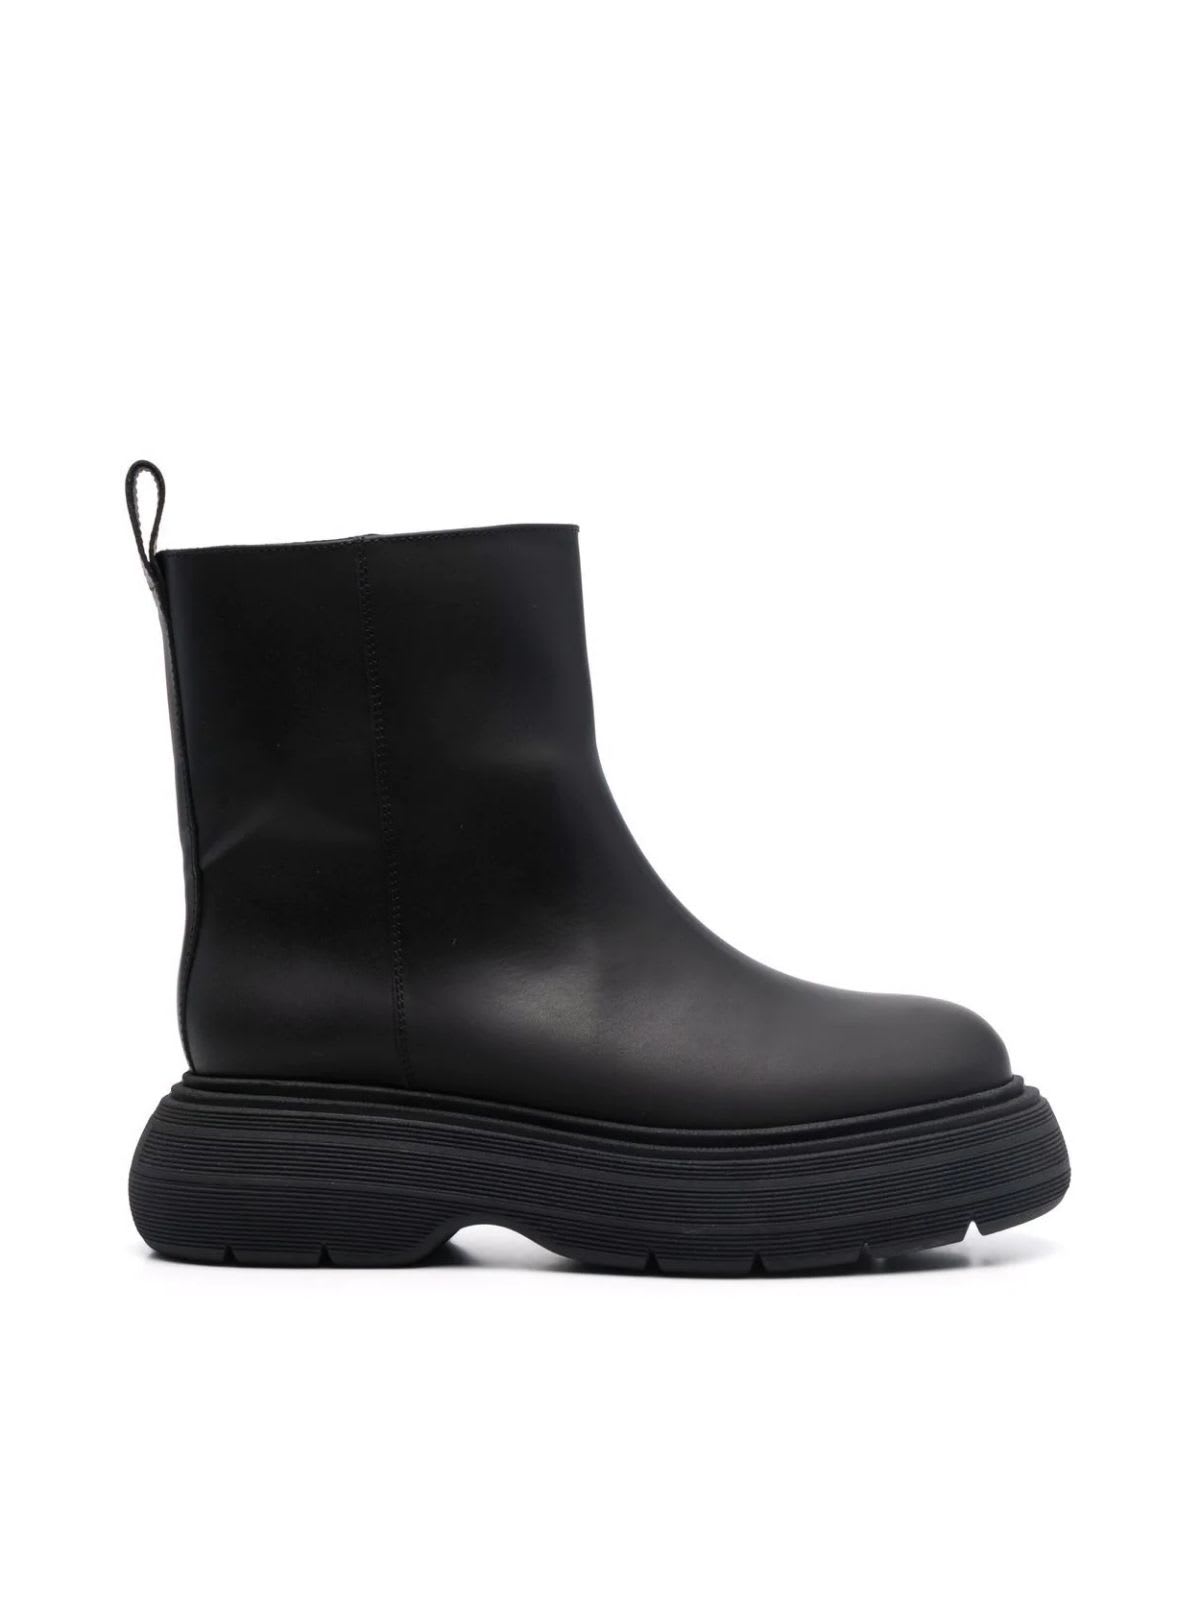 GIA BORGHINI Short Black Rubber Boot With A Chunky Sole